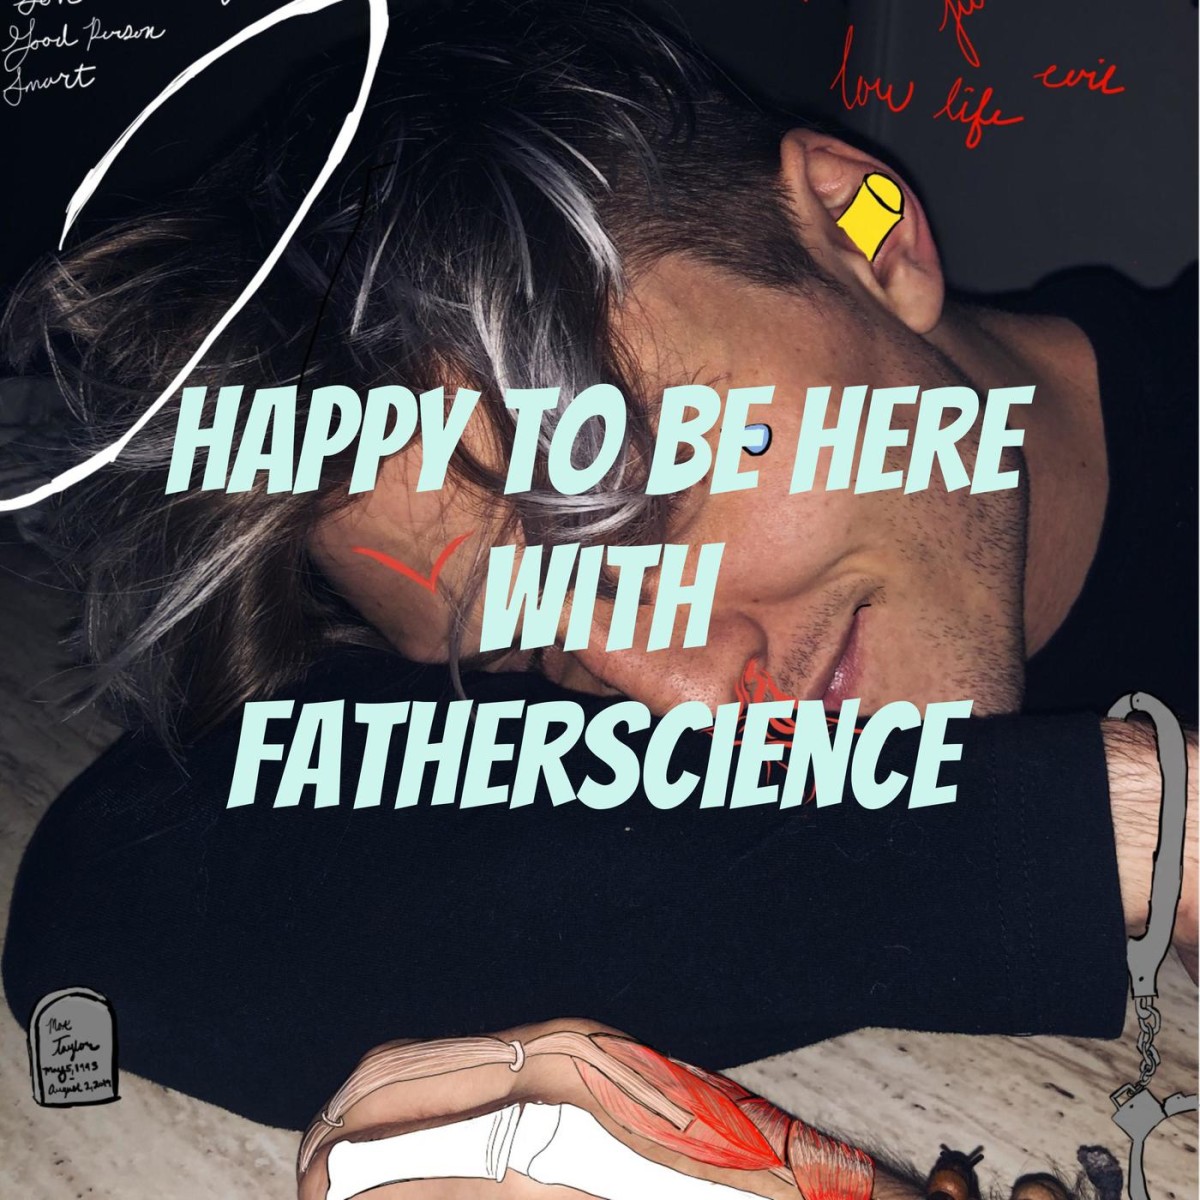 Fatherscience